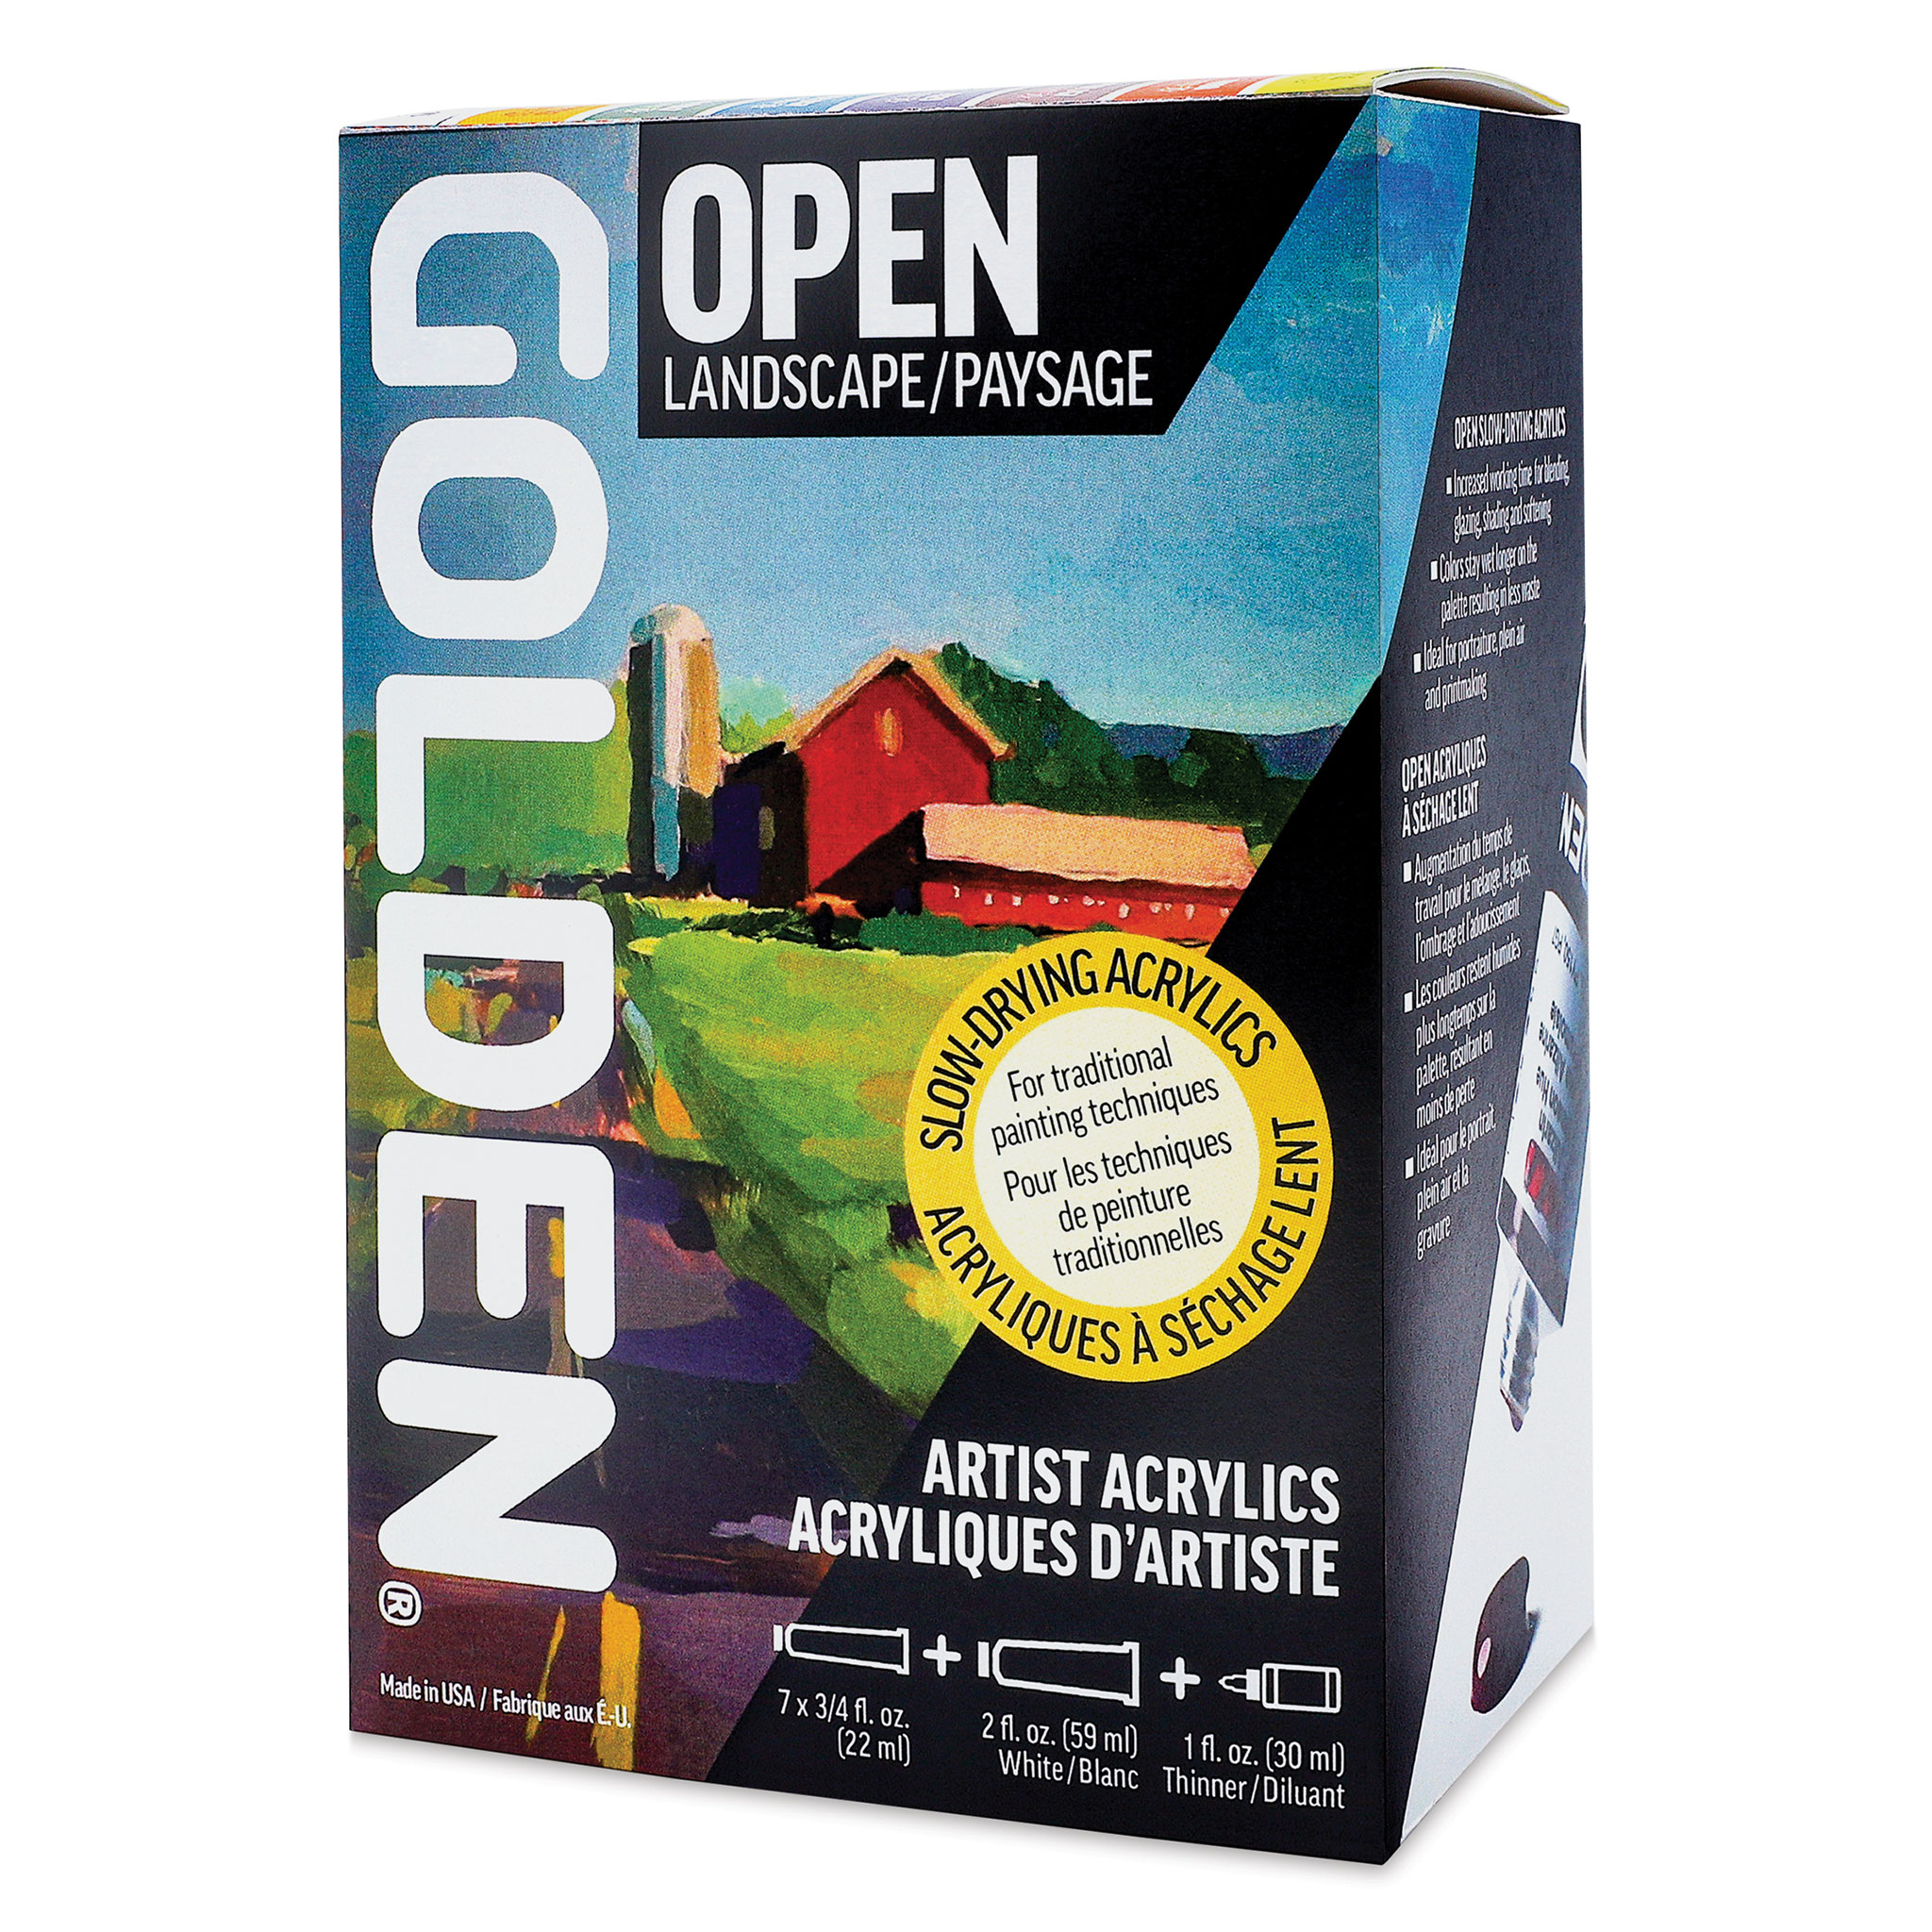 Free to someone in need of OPEN acrylics— I'm getting rid of these paints  and I'm hoping someone enjoys the new “OPEN Acrylic” paints by golden, I  didn't like them, but I